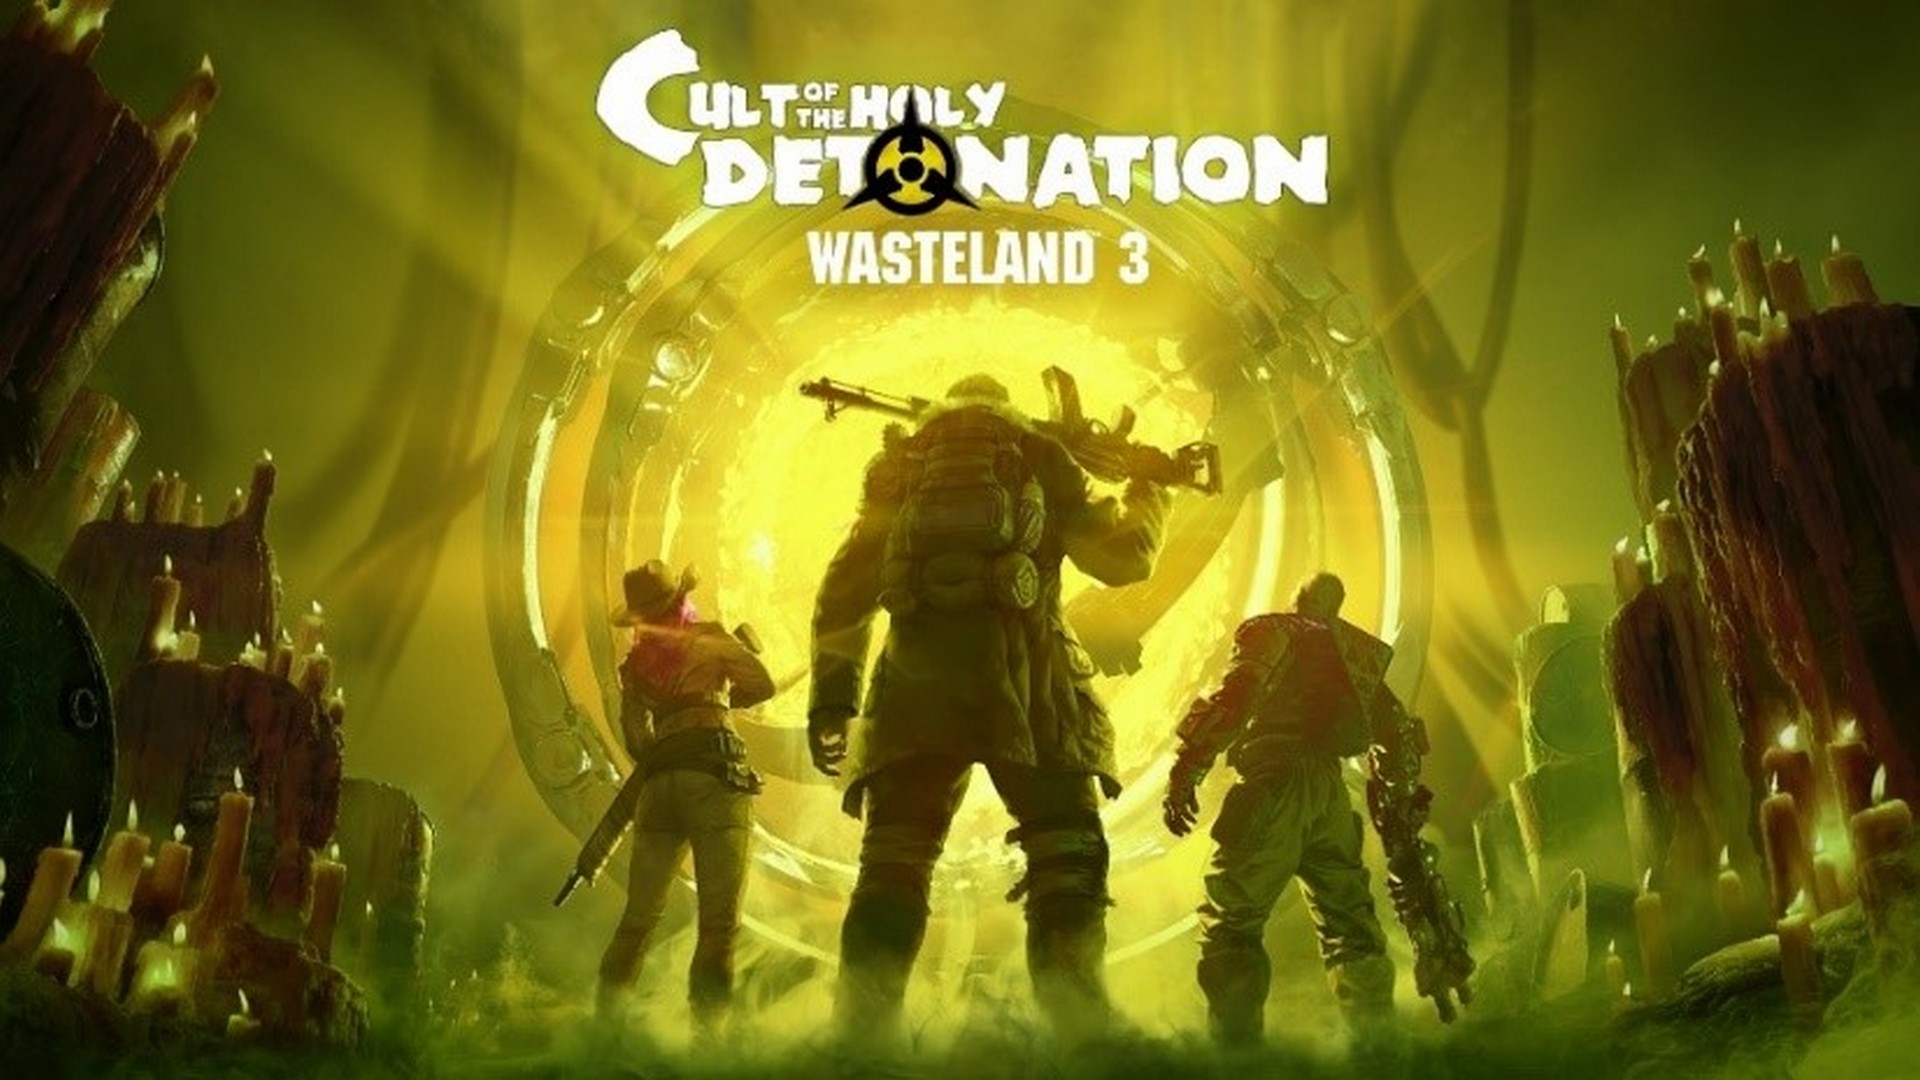 Wasteland 3: Cult of the Holy Detonation DLC & Colorado Collection Revealed